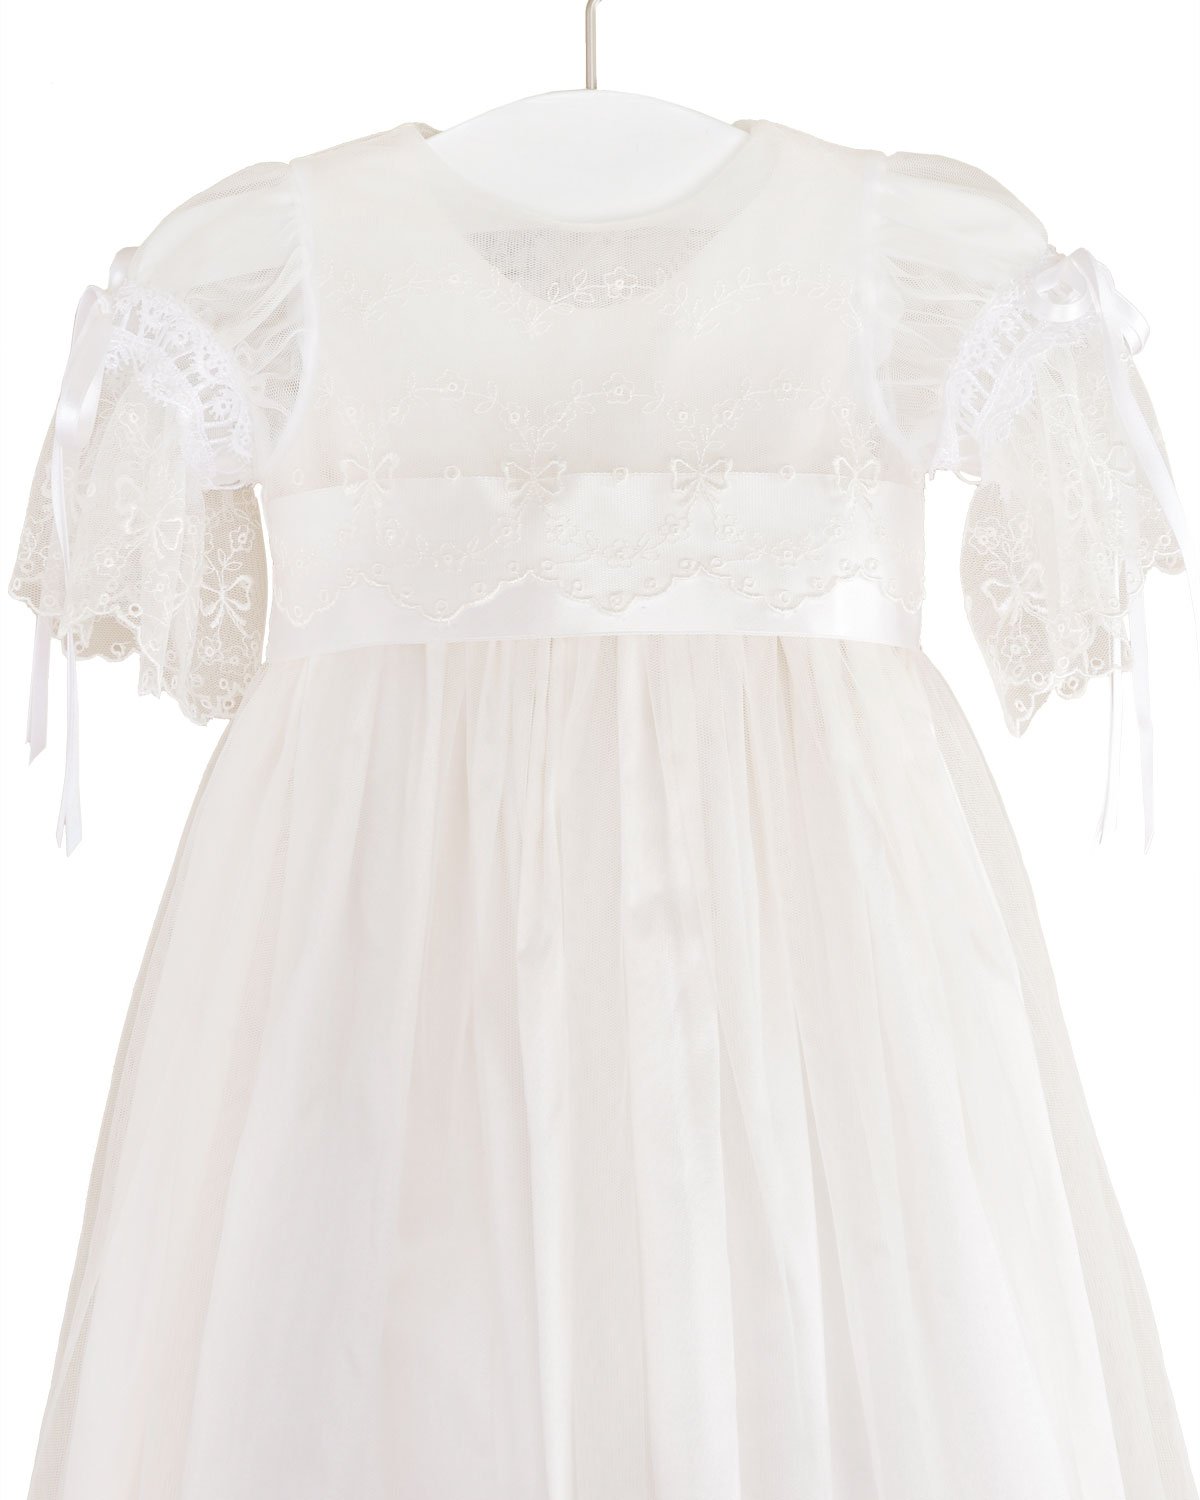 Natalia Silk and Lace Christening or Baptism Gown for Girls, Made in USA